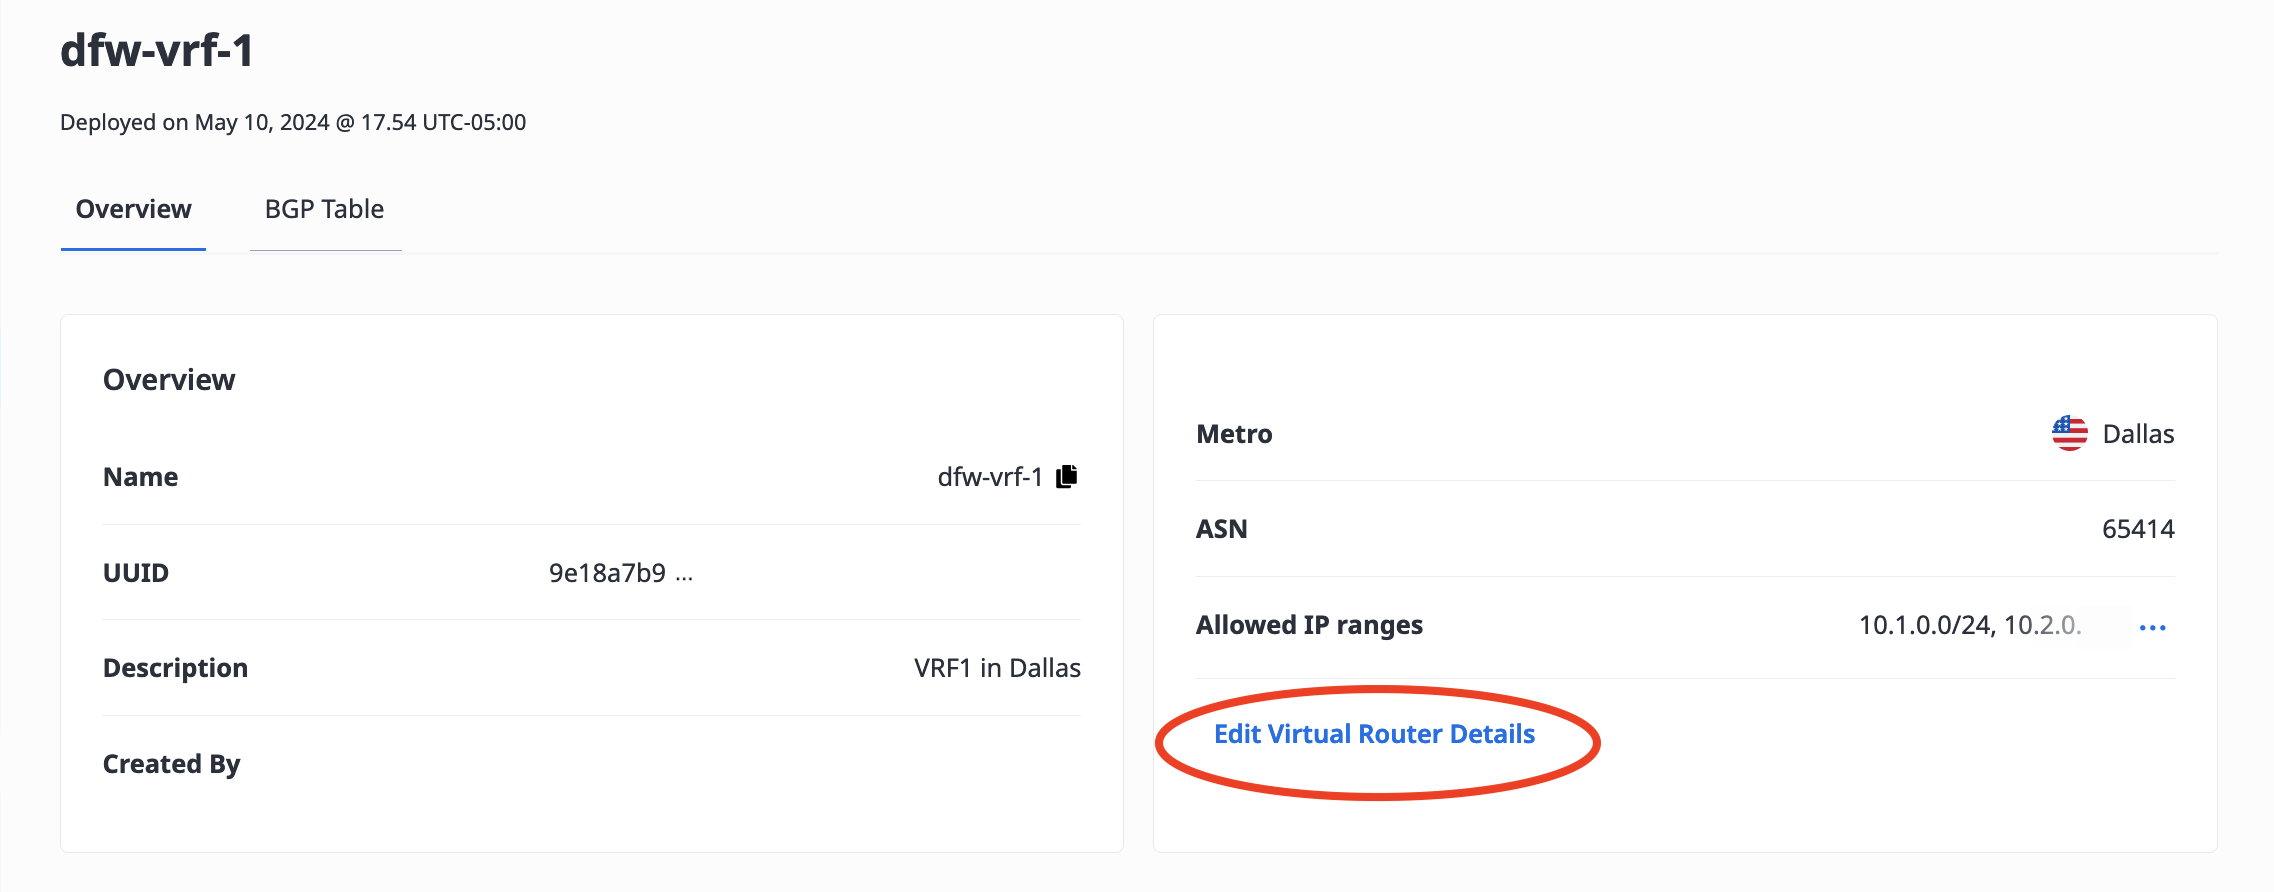 Edit Virtual Router Details in the Console